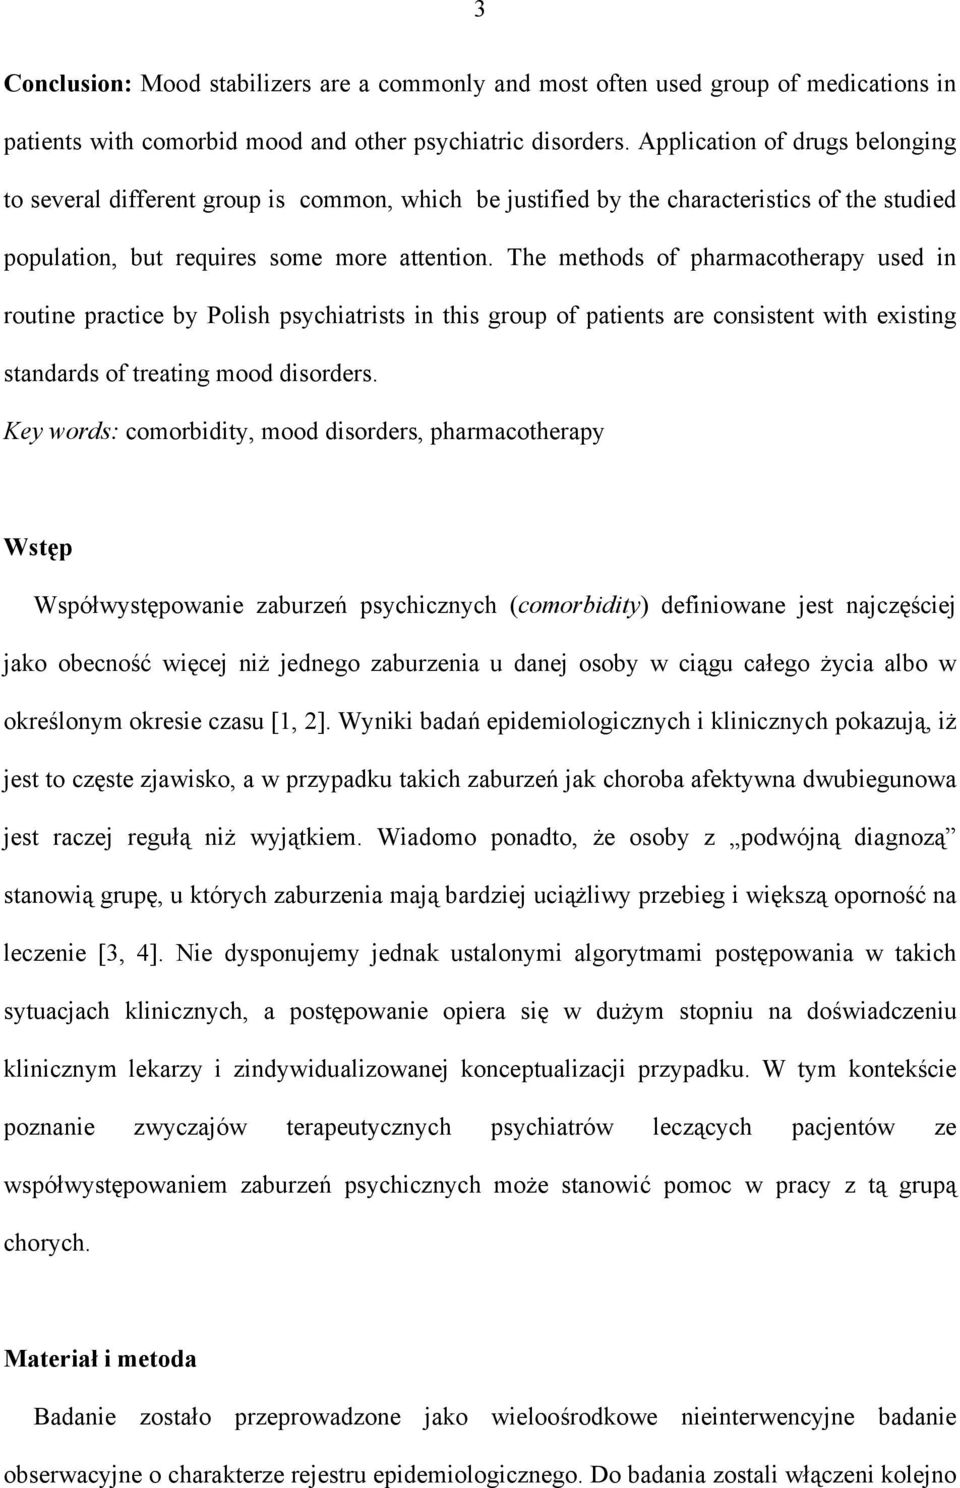 The methods of pharmacotherapy used in routine practice by Polish psychiatrists in this group of patients are consistent with existing standards of treating mood disorders.